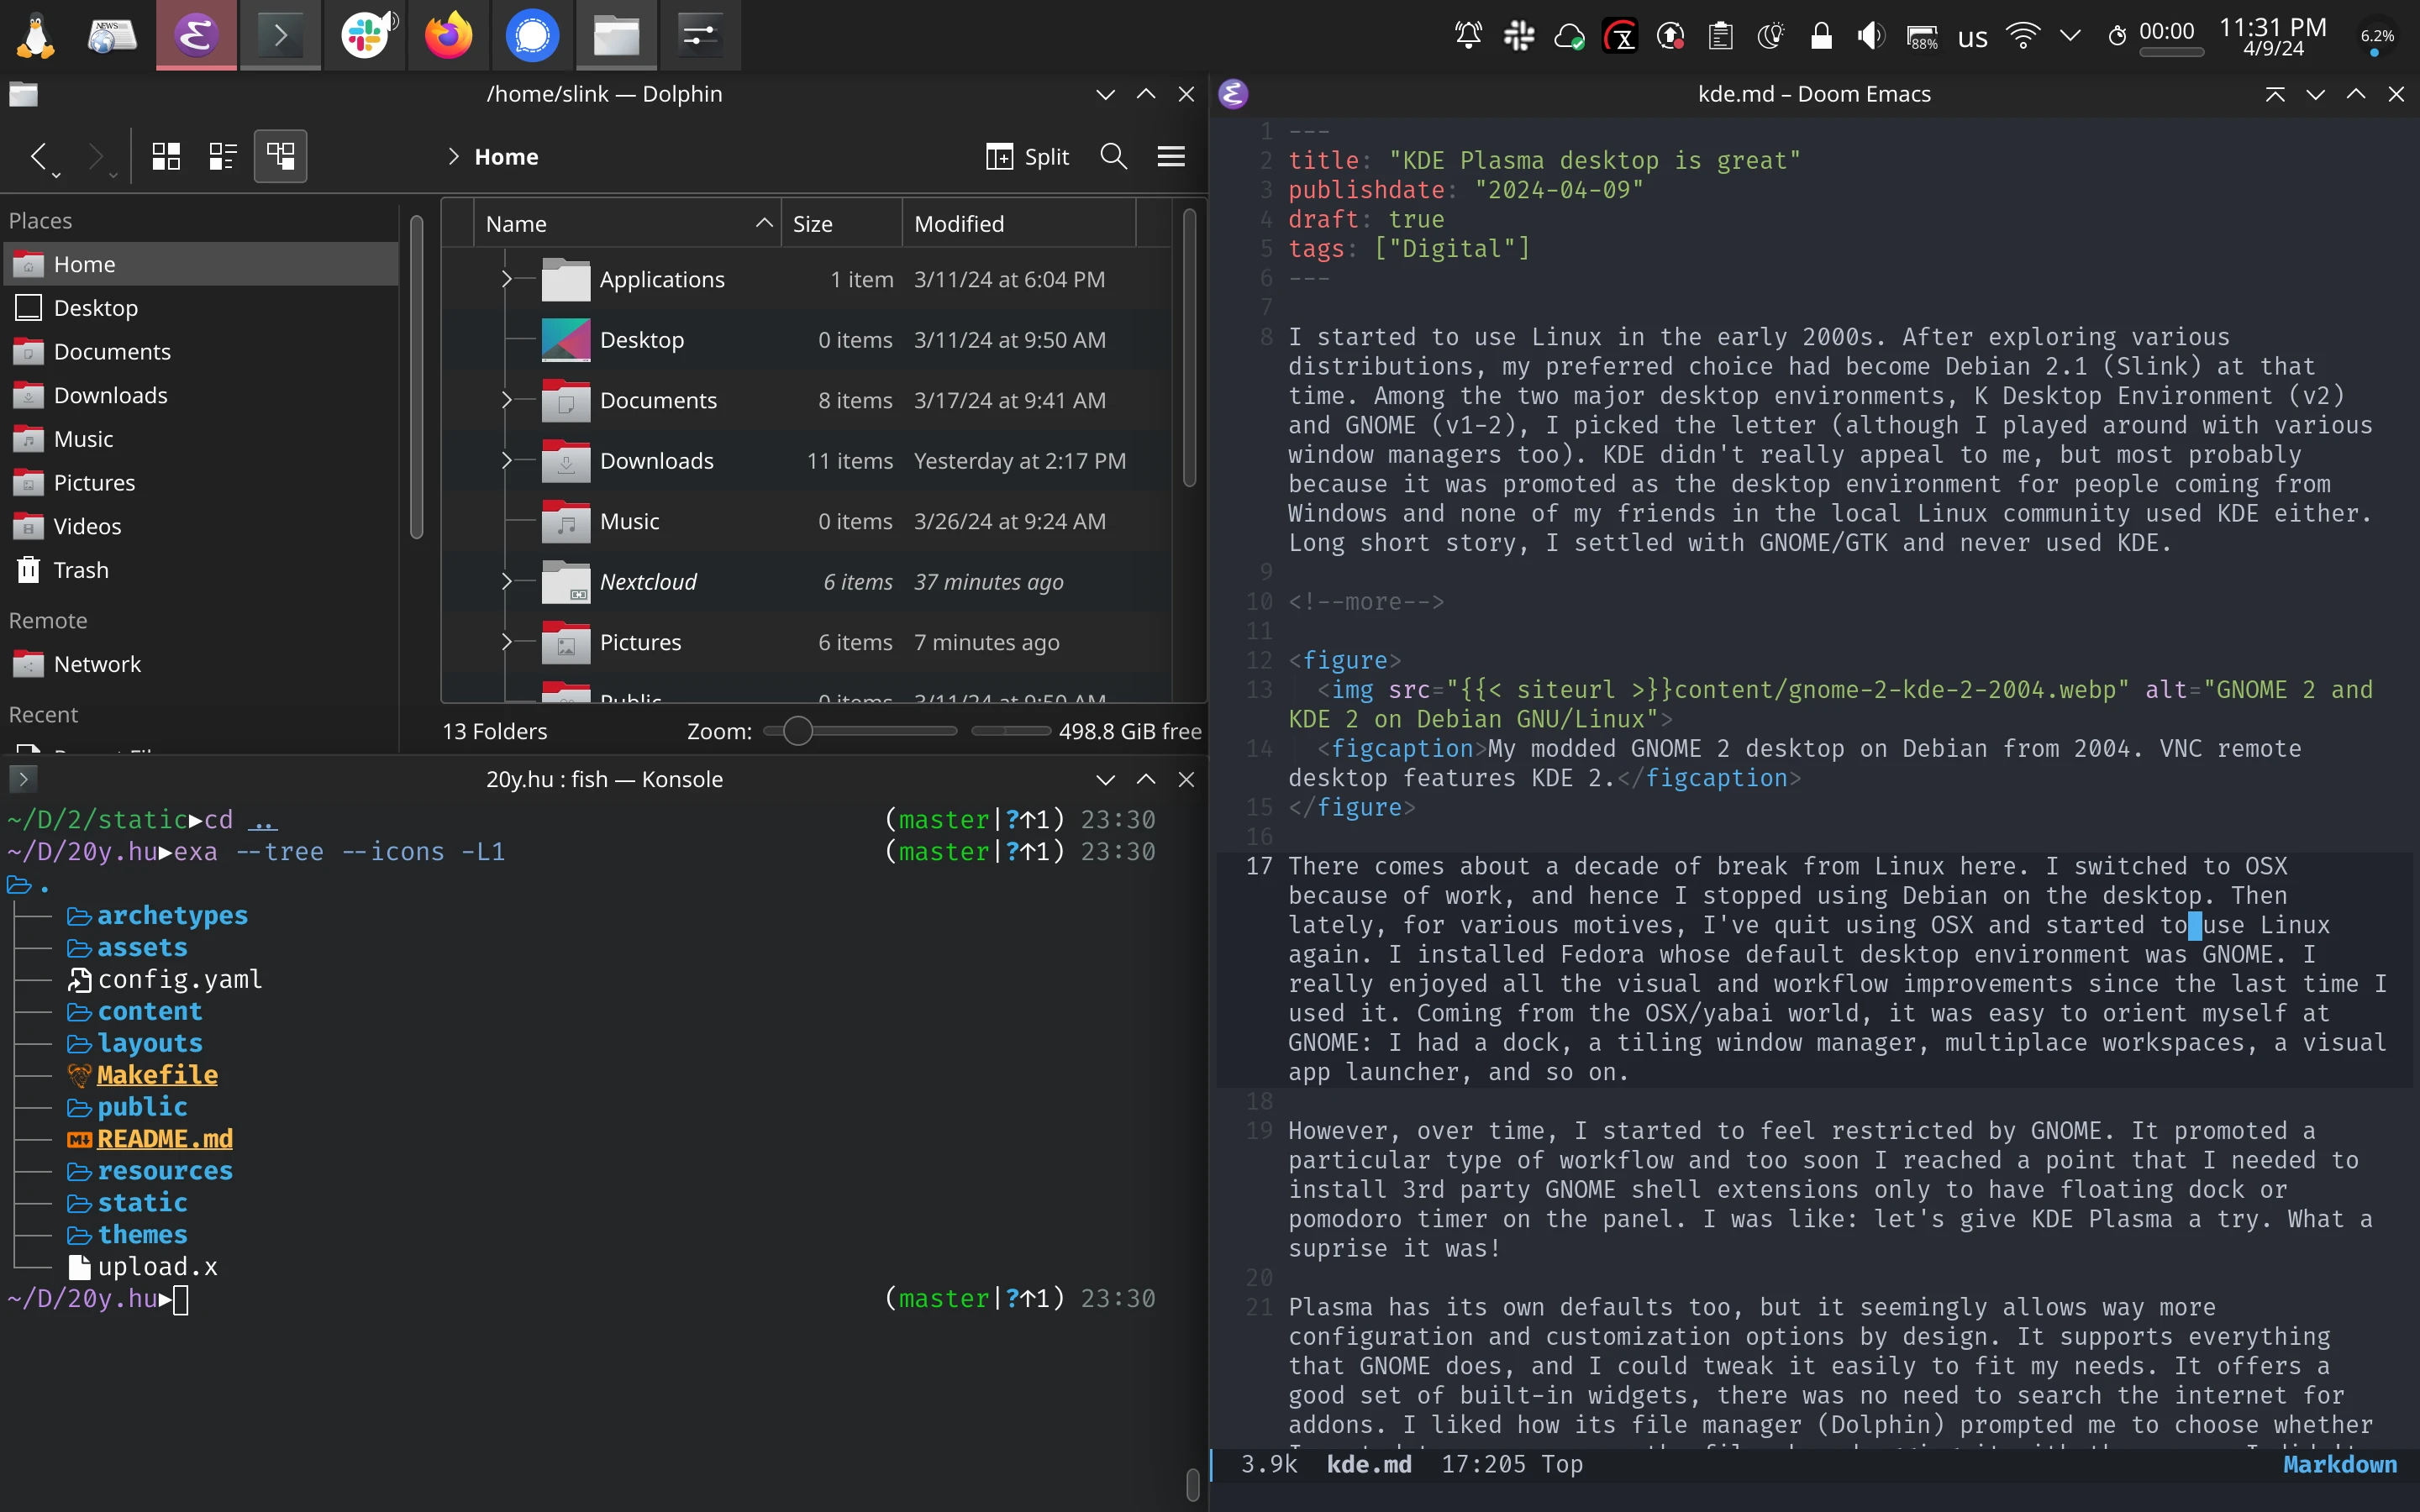 Dolphin file manager, Konsole terminal emulator, and GNU Emacs in split view on KDE Plasma 5 on Tuxedo Linux 2